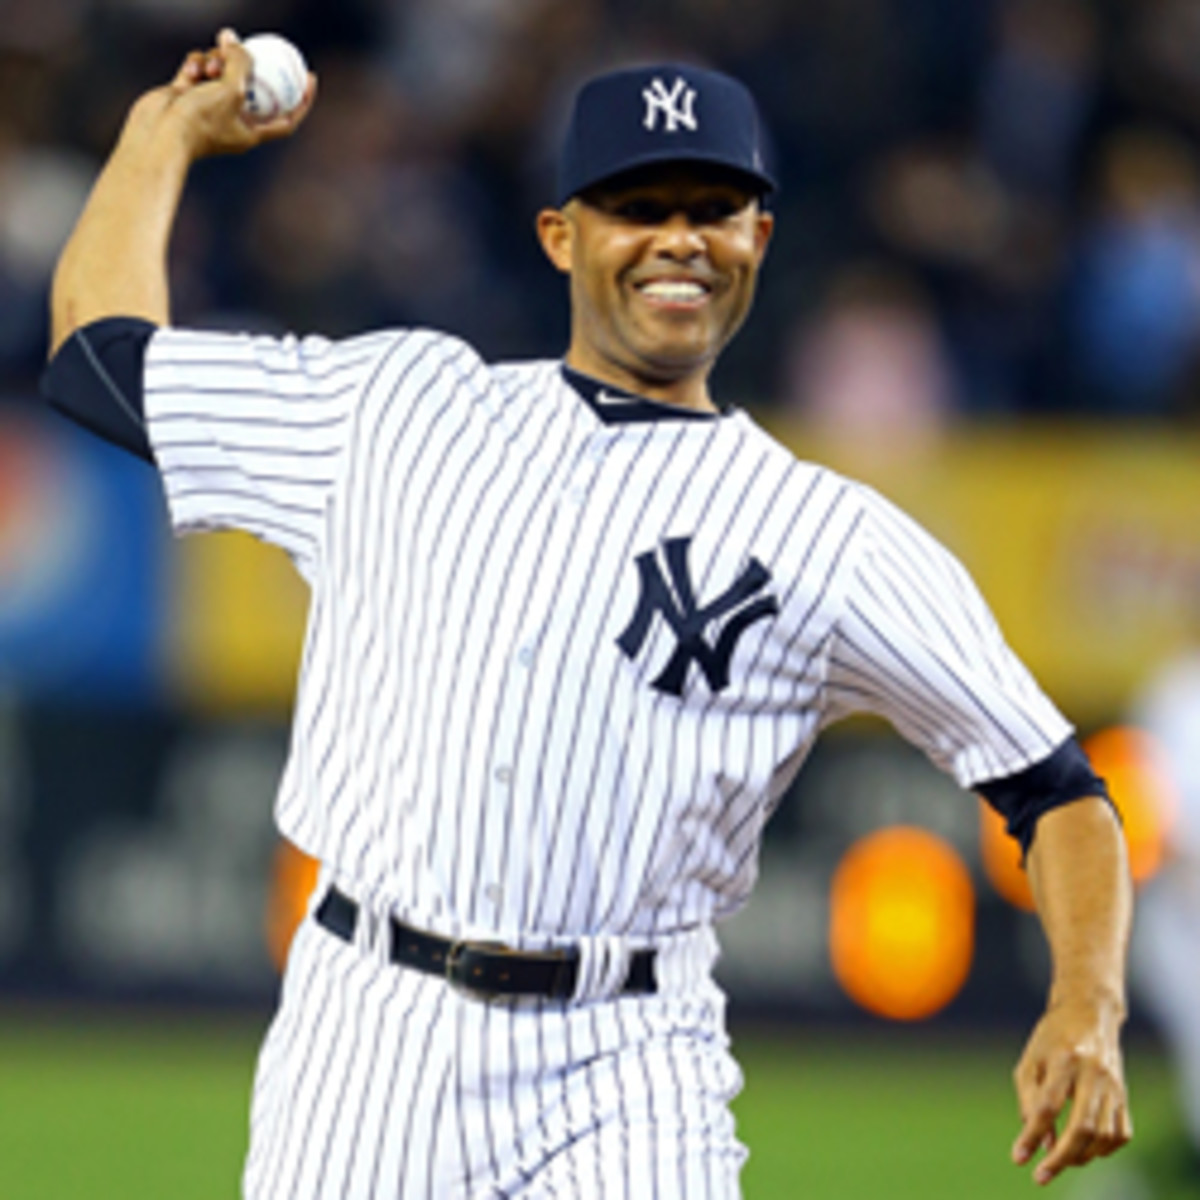 Yankees closer Mariano Rivera will reportedly make his spring training debut this weekend. (Al Bello/Getty Images)